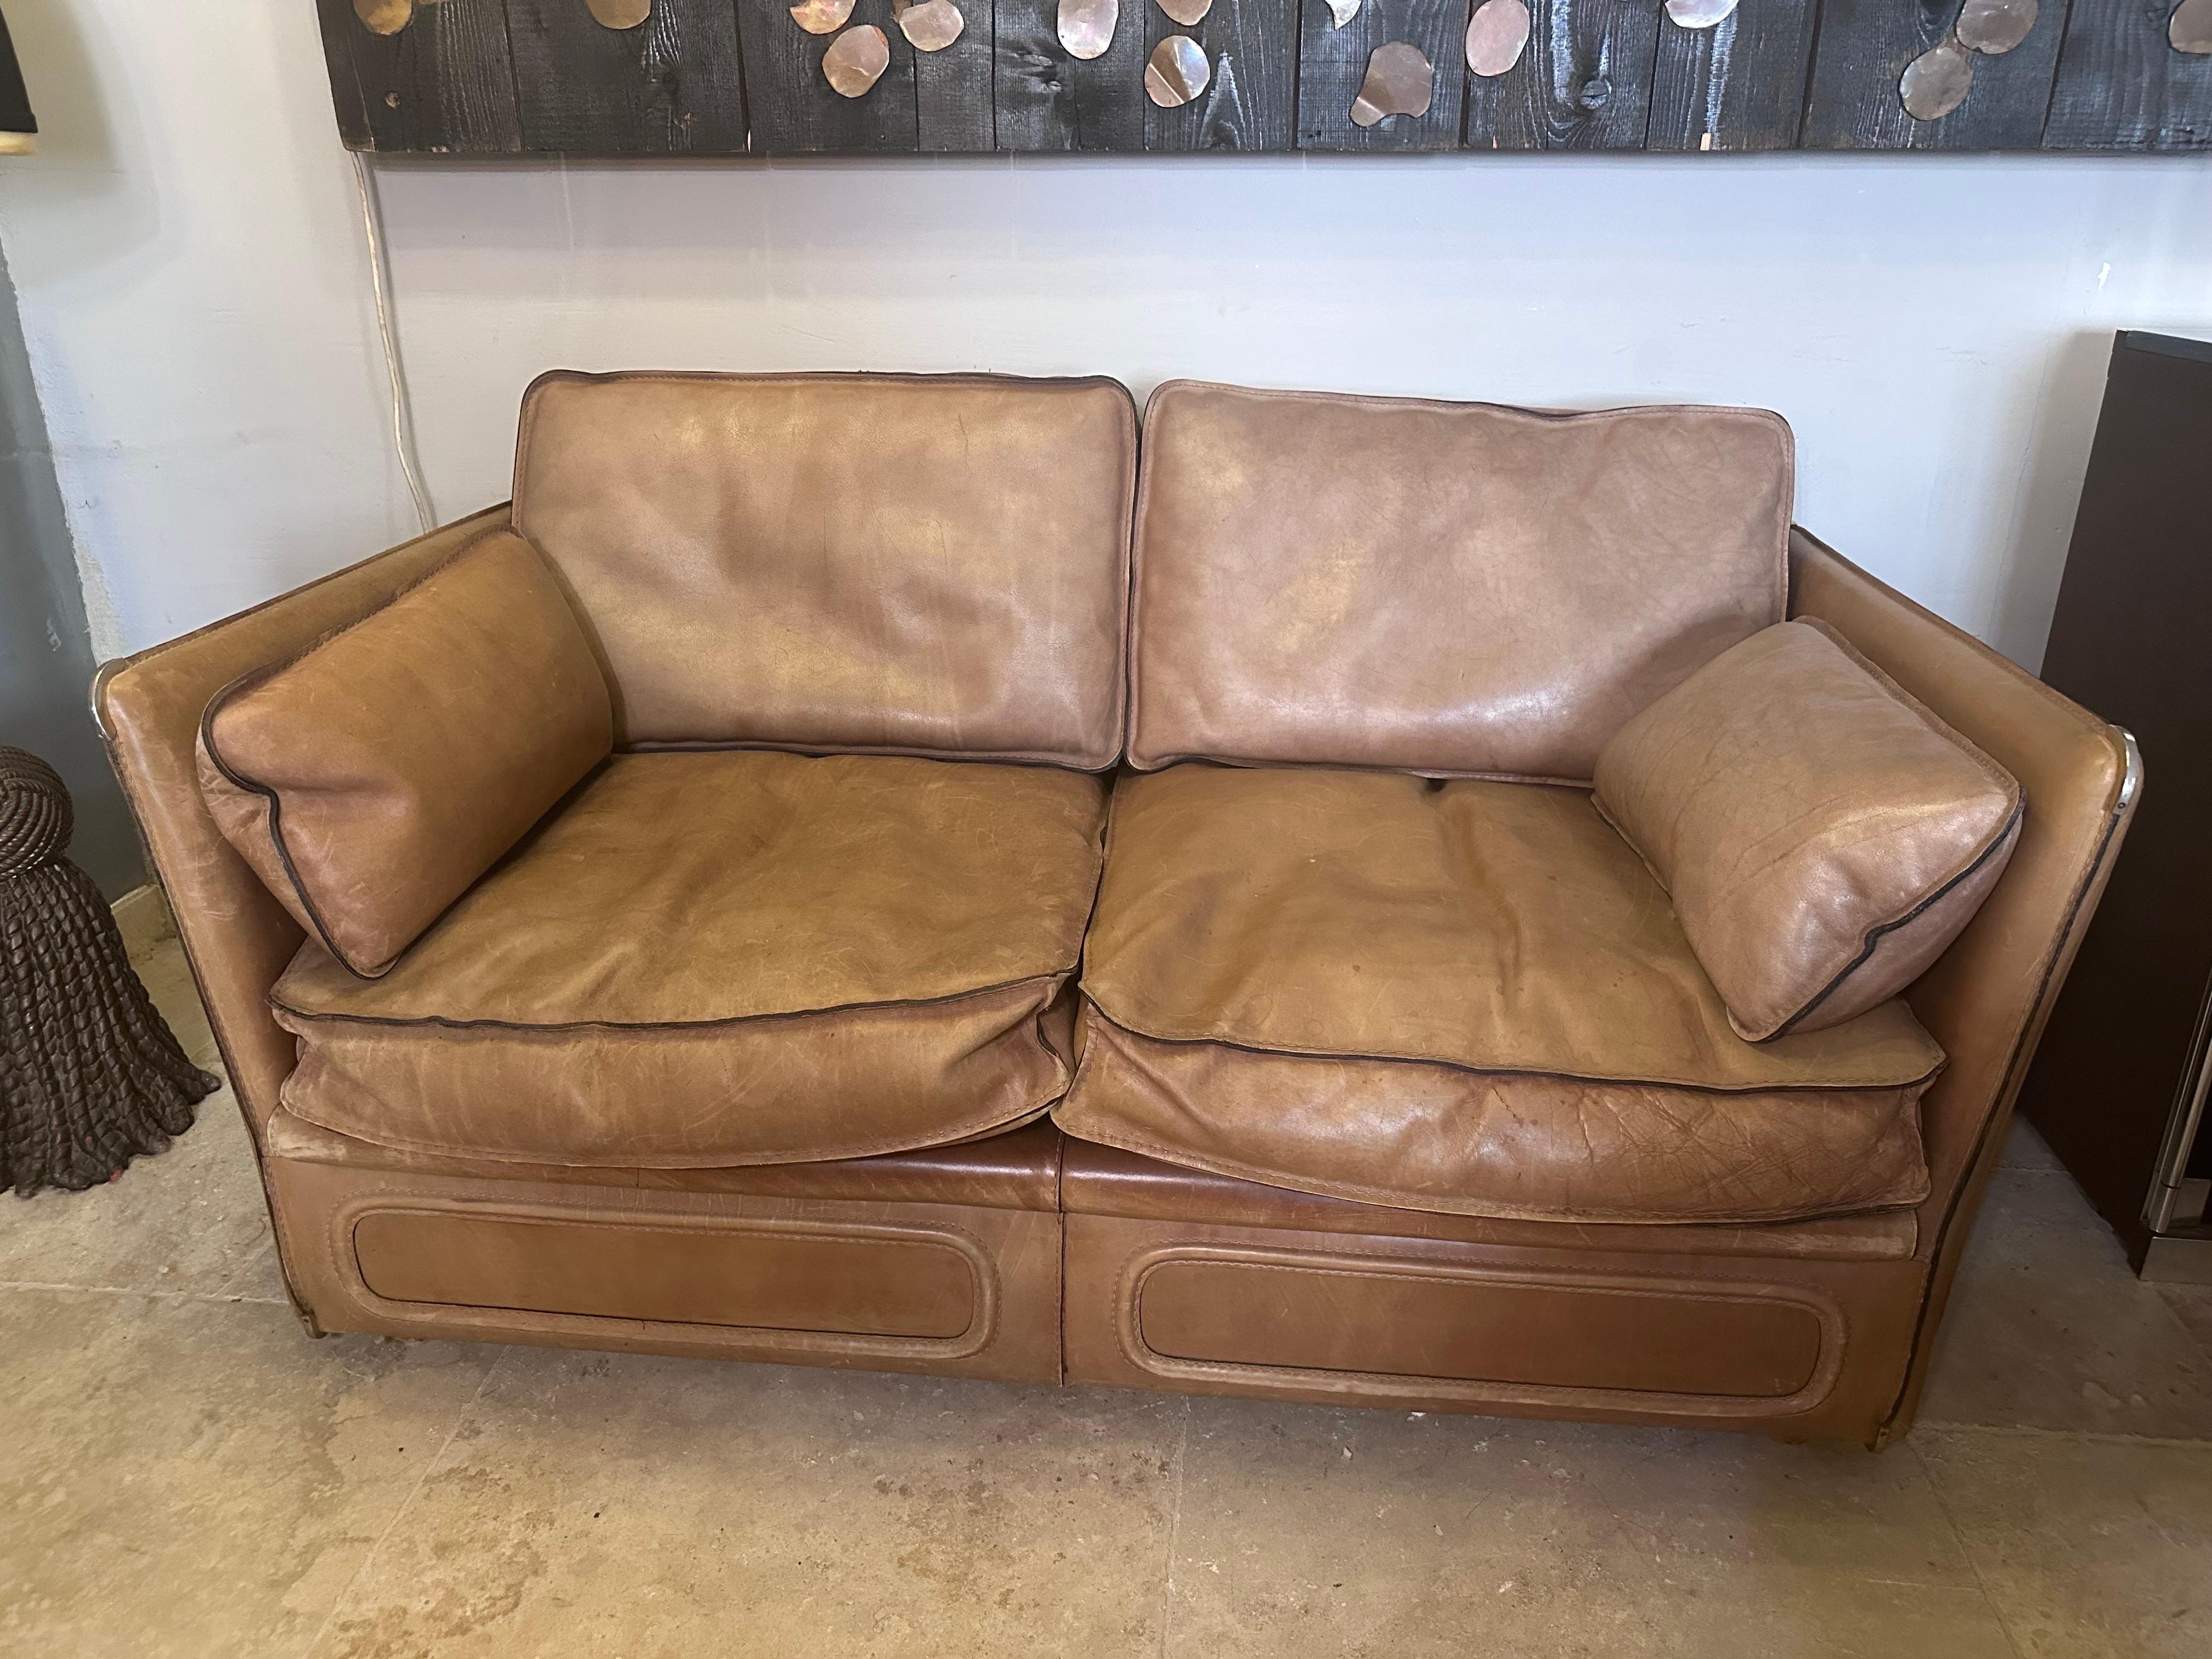 Roche Bobois leather 2 seaters sofa from the seventies.
Thick buffalo leather, brass corners, feathers cushions, saddle stitching, wooden legs... 
Great quality and condition for this rare sofa.
Pair available.